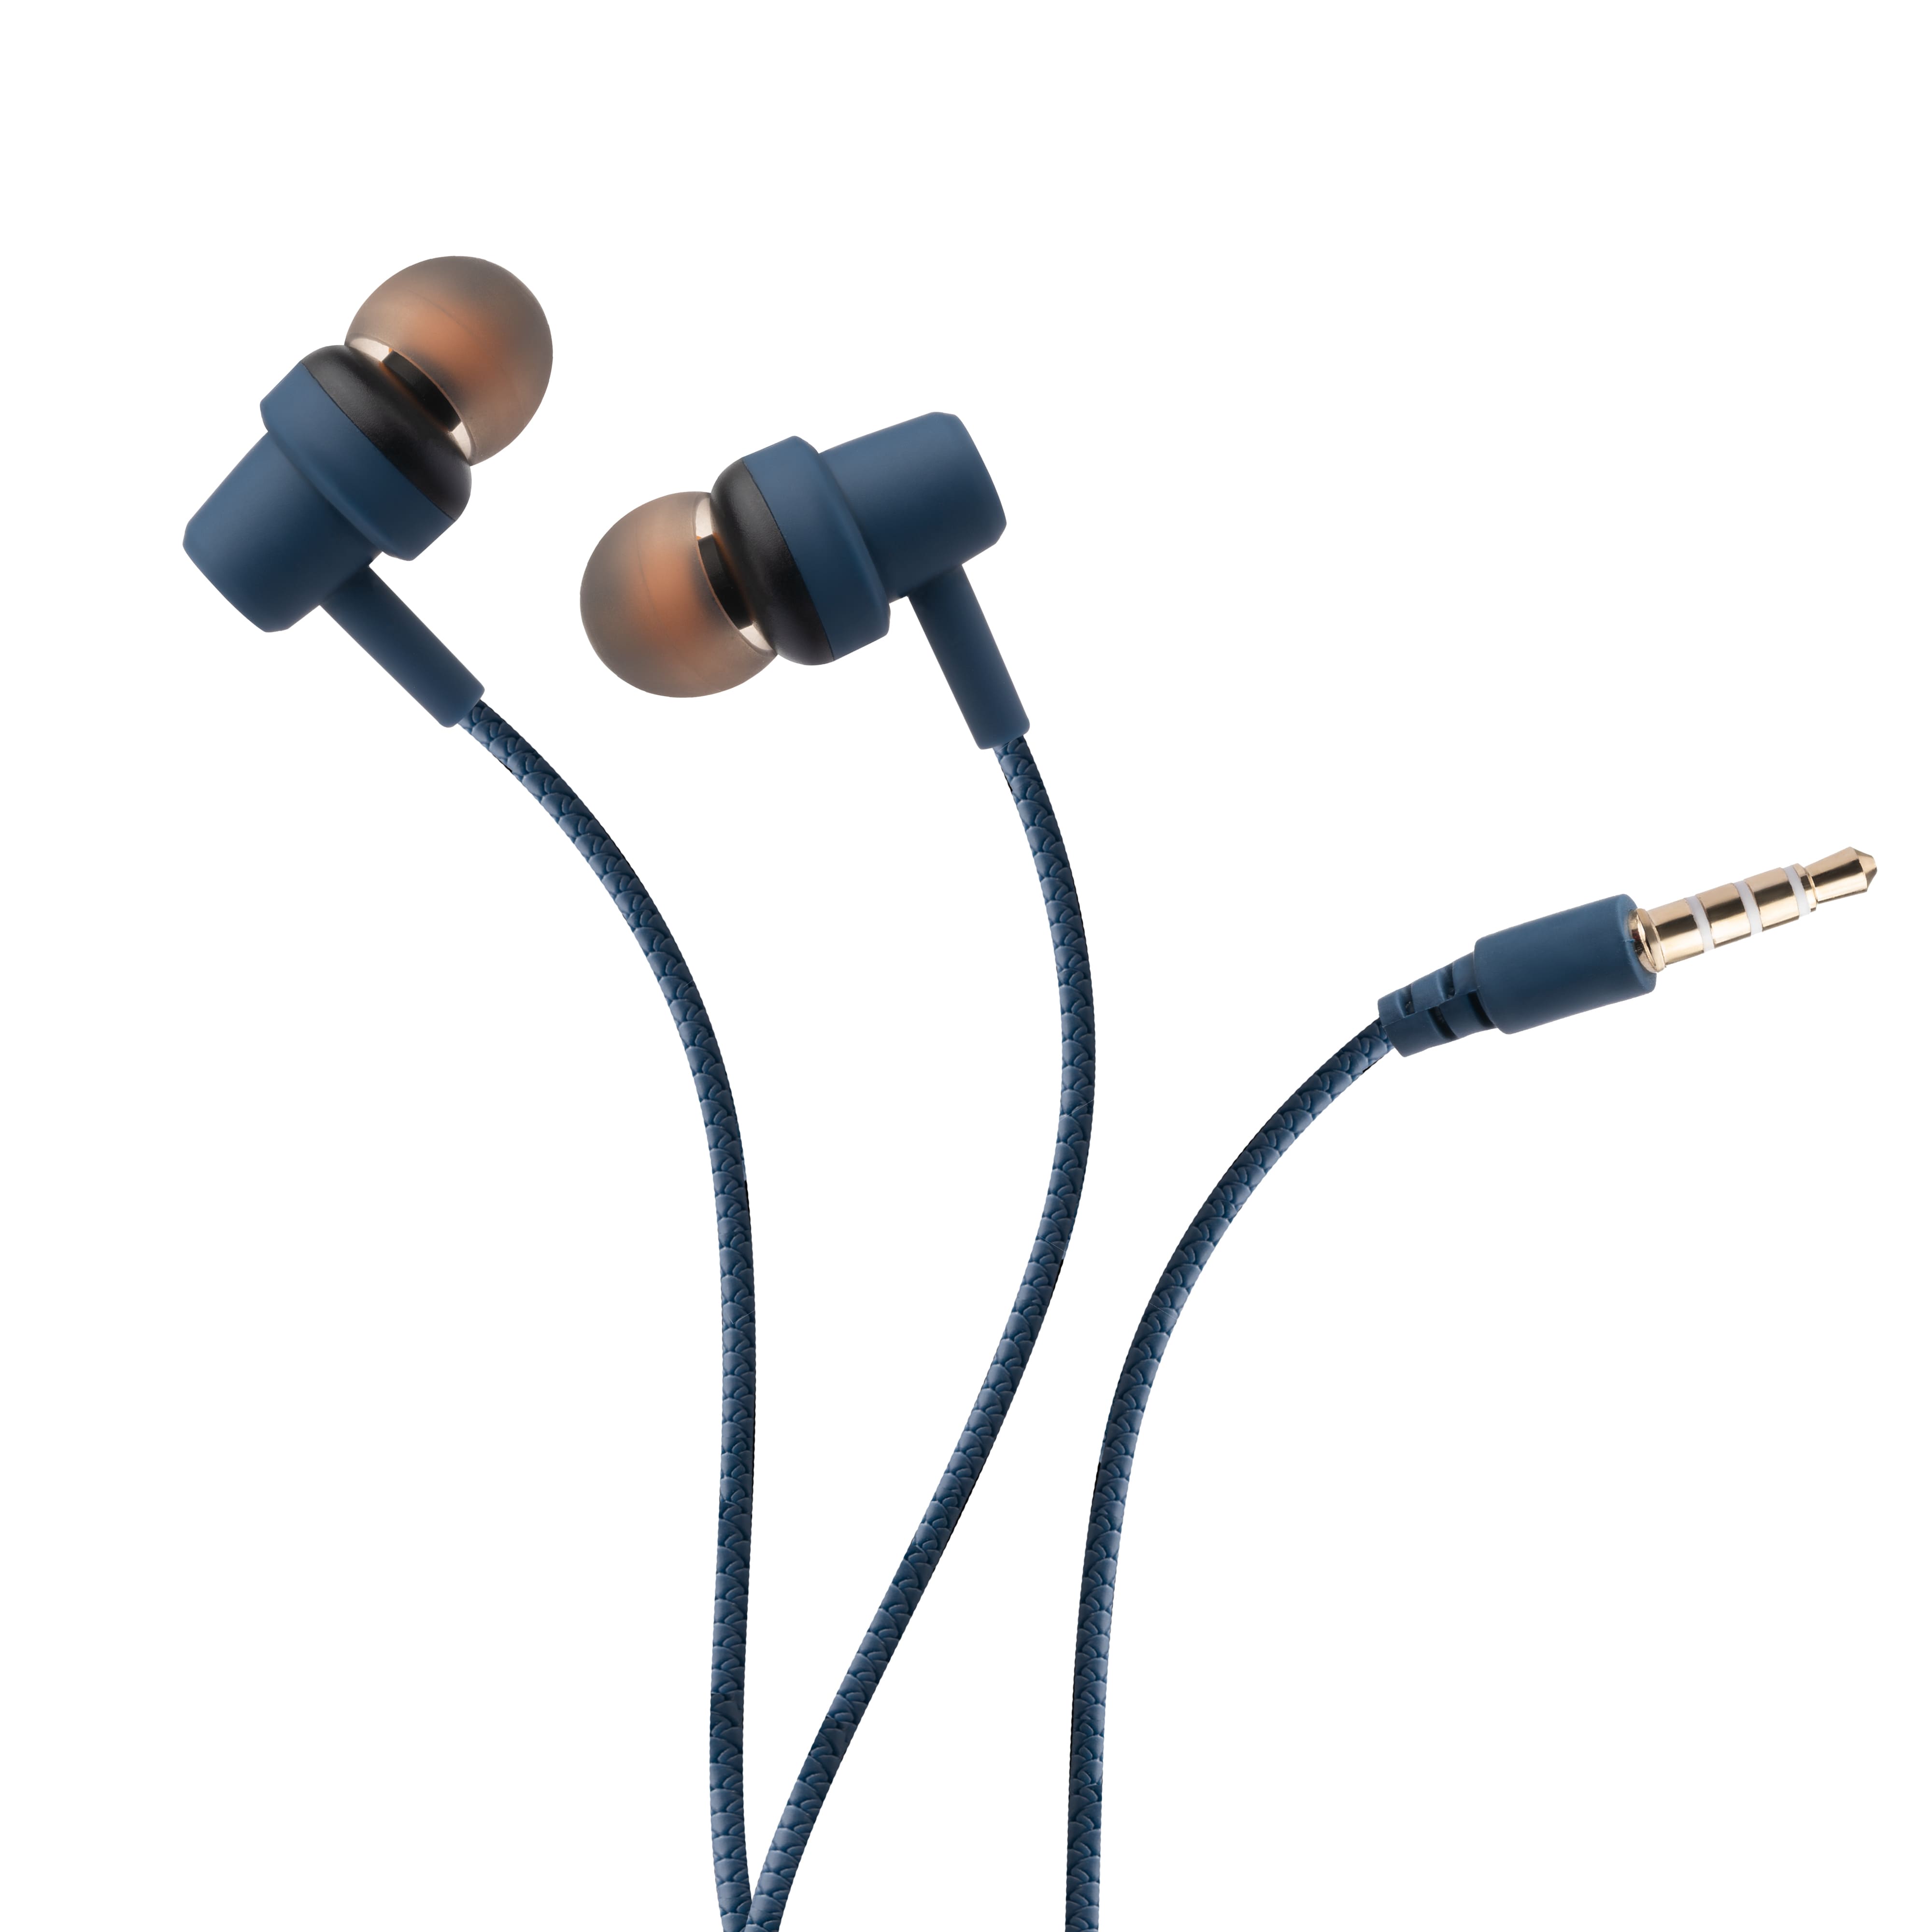 Lapcare WOOBUDS VII wired Earbuds with inbuilt MIC -Blue (LBD-909)